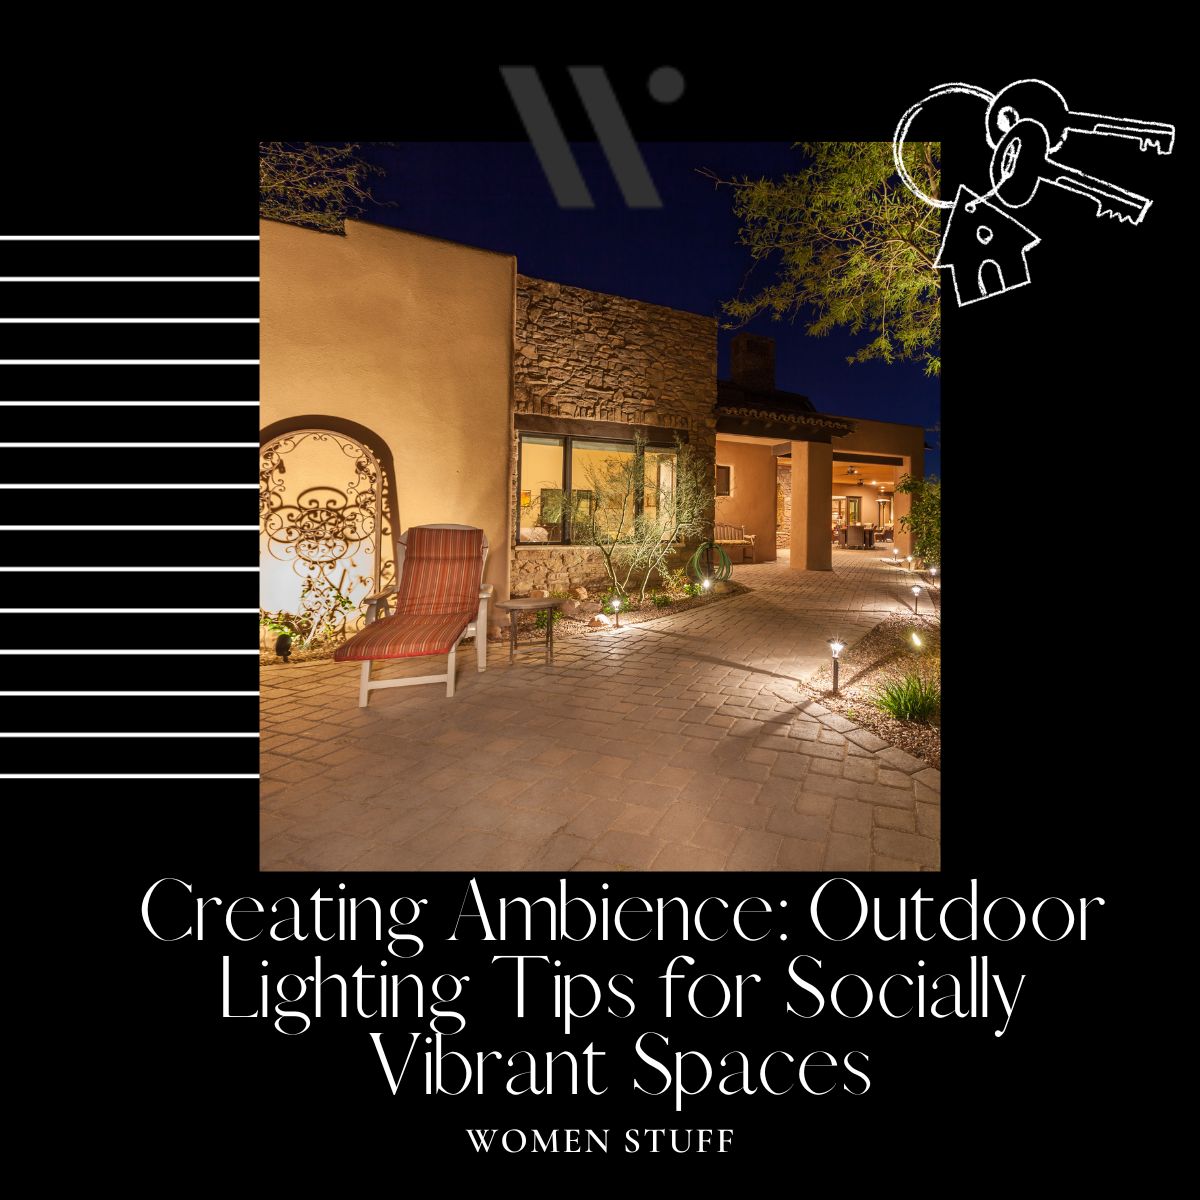 Creating Ambiance Outdoor Lighting Tips for Socially Vibrant Spaces